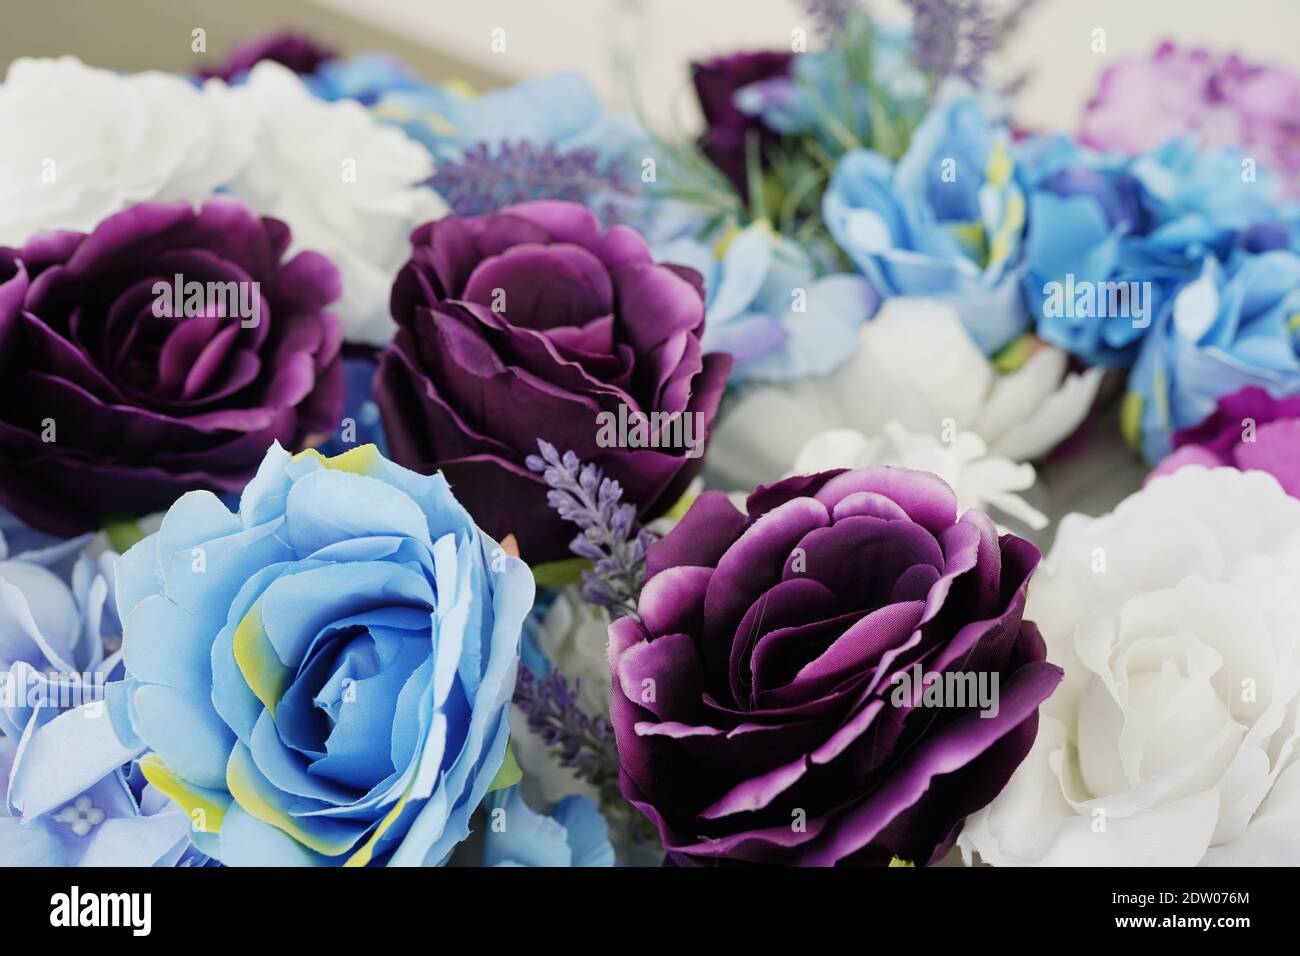 Close up focus on pink,purple, white and blue blooming spring flowers Stock Photo